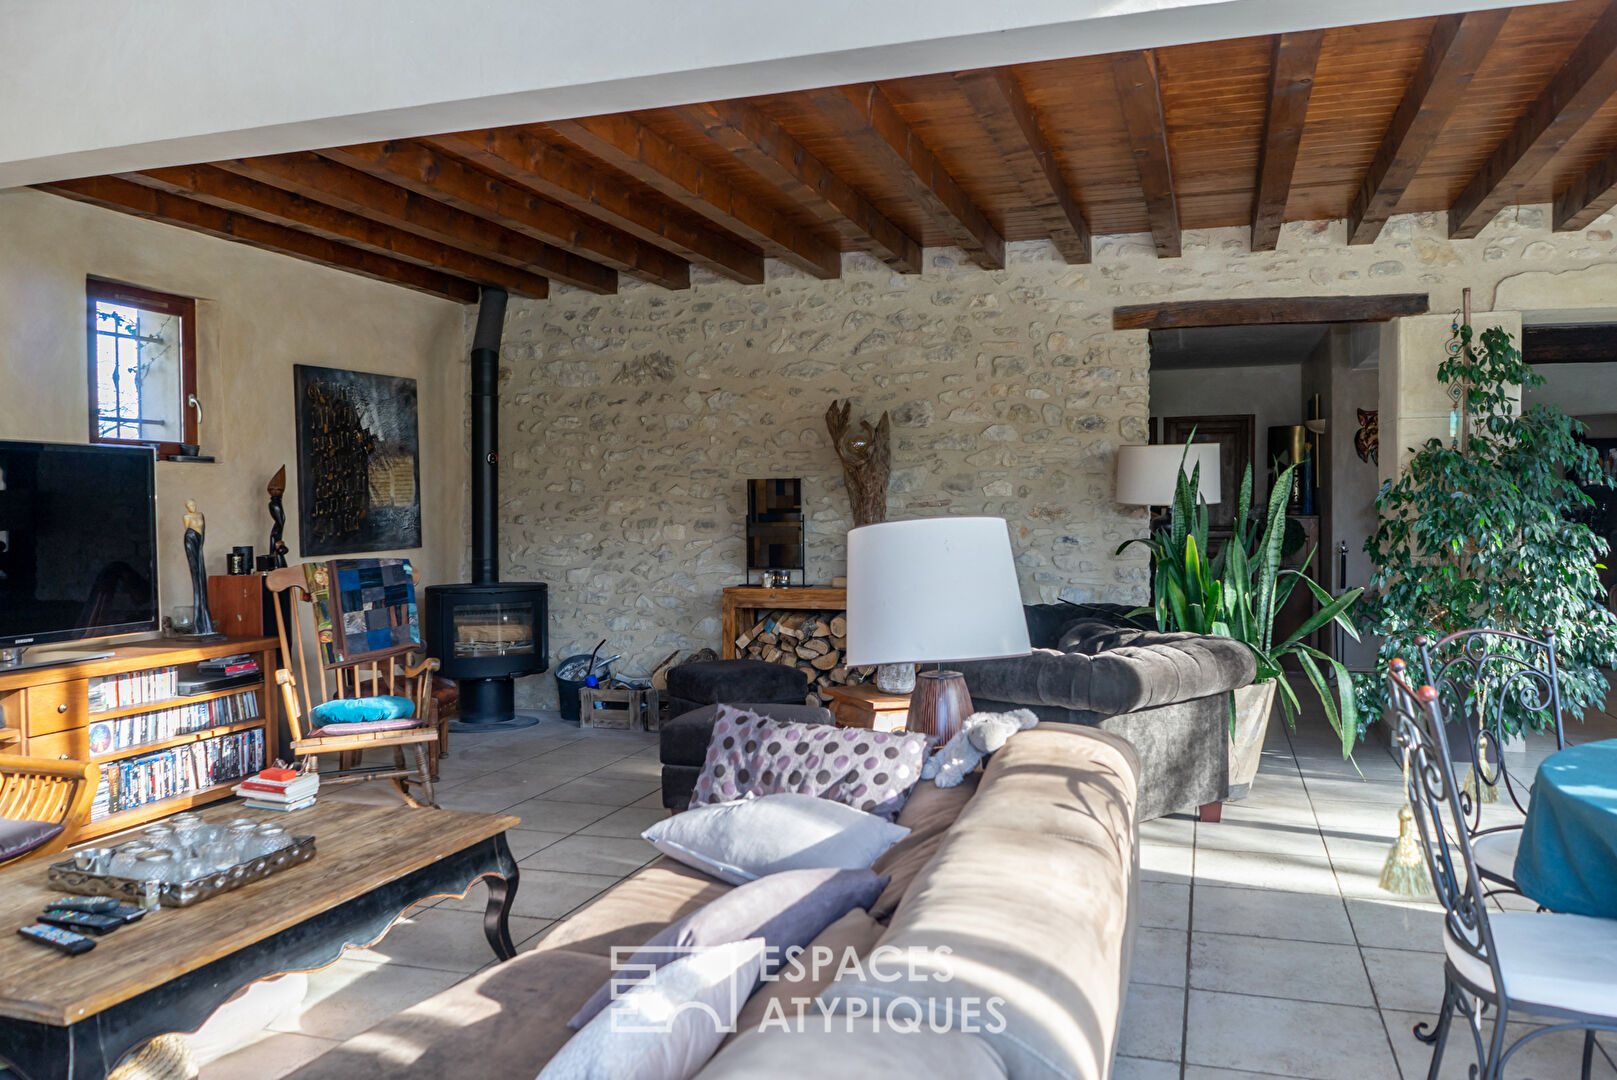 Superb stone house with geothermal heating and lush garden on the edge of the village